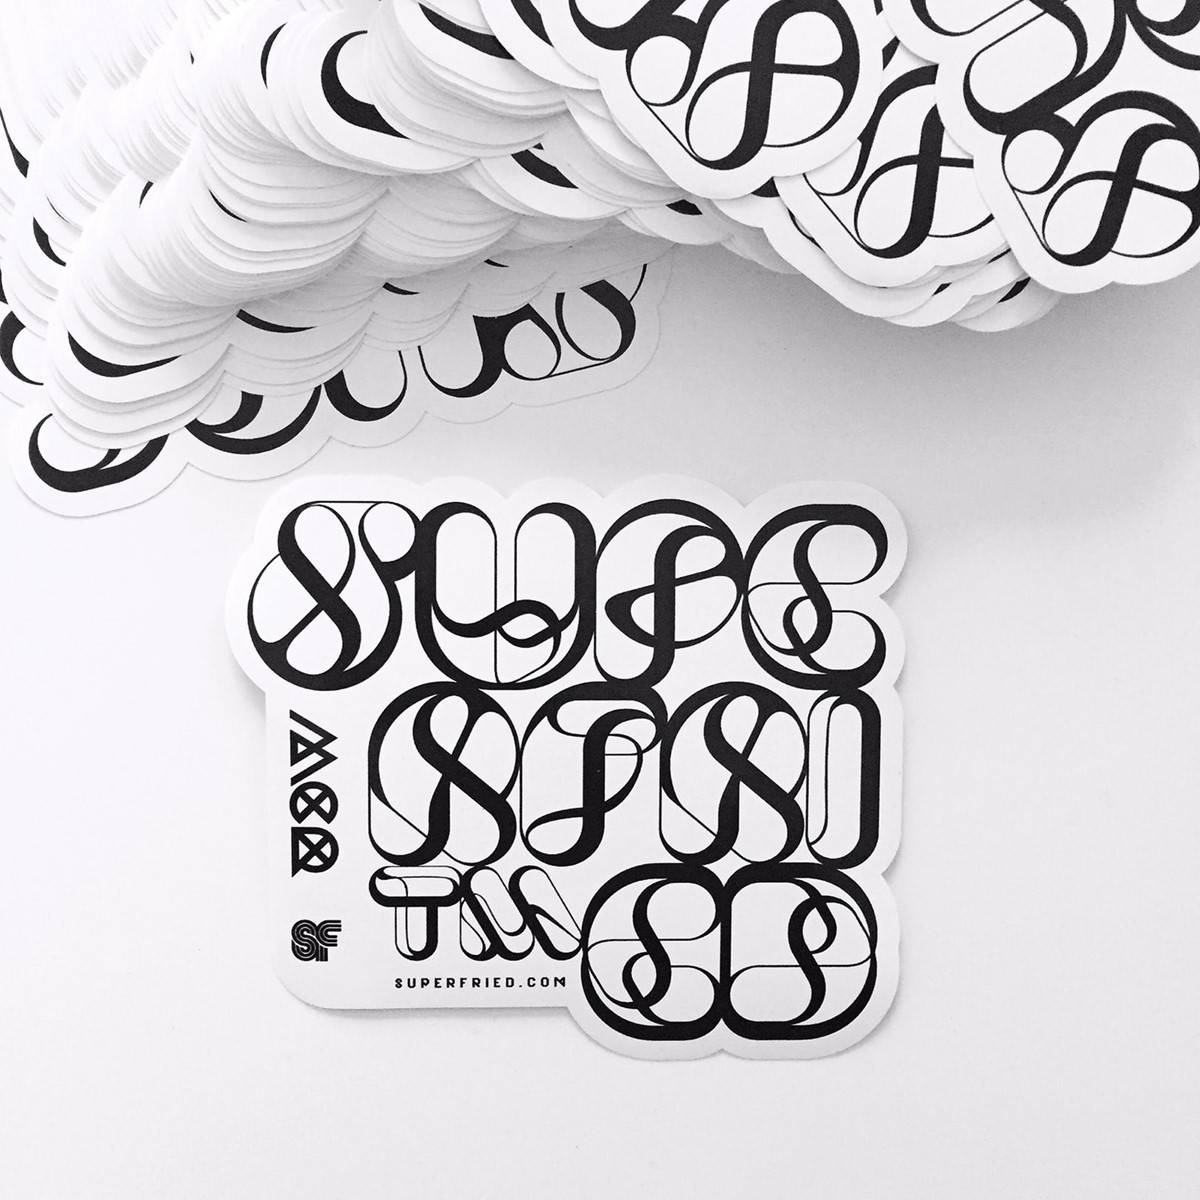 Marbles. Experimental bespoke type style sticker. Typography design by Superfried.